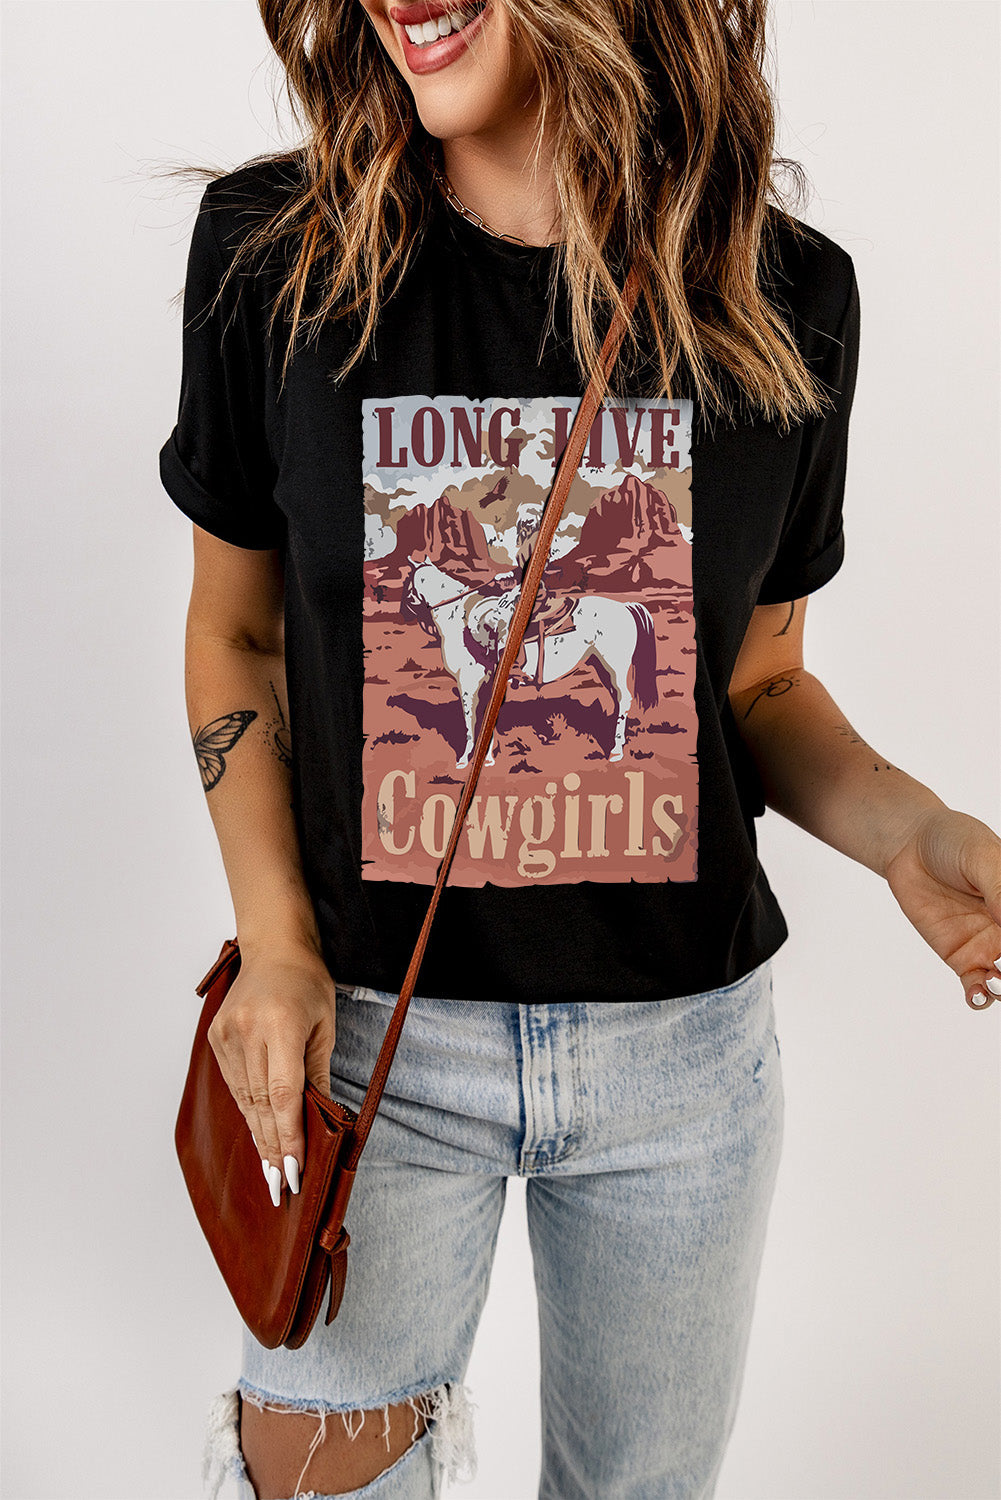 LONG LIVE COWGIRLS Graphic Tee